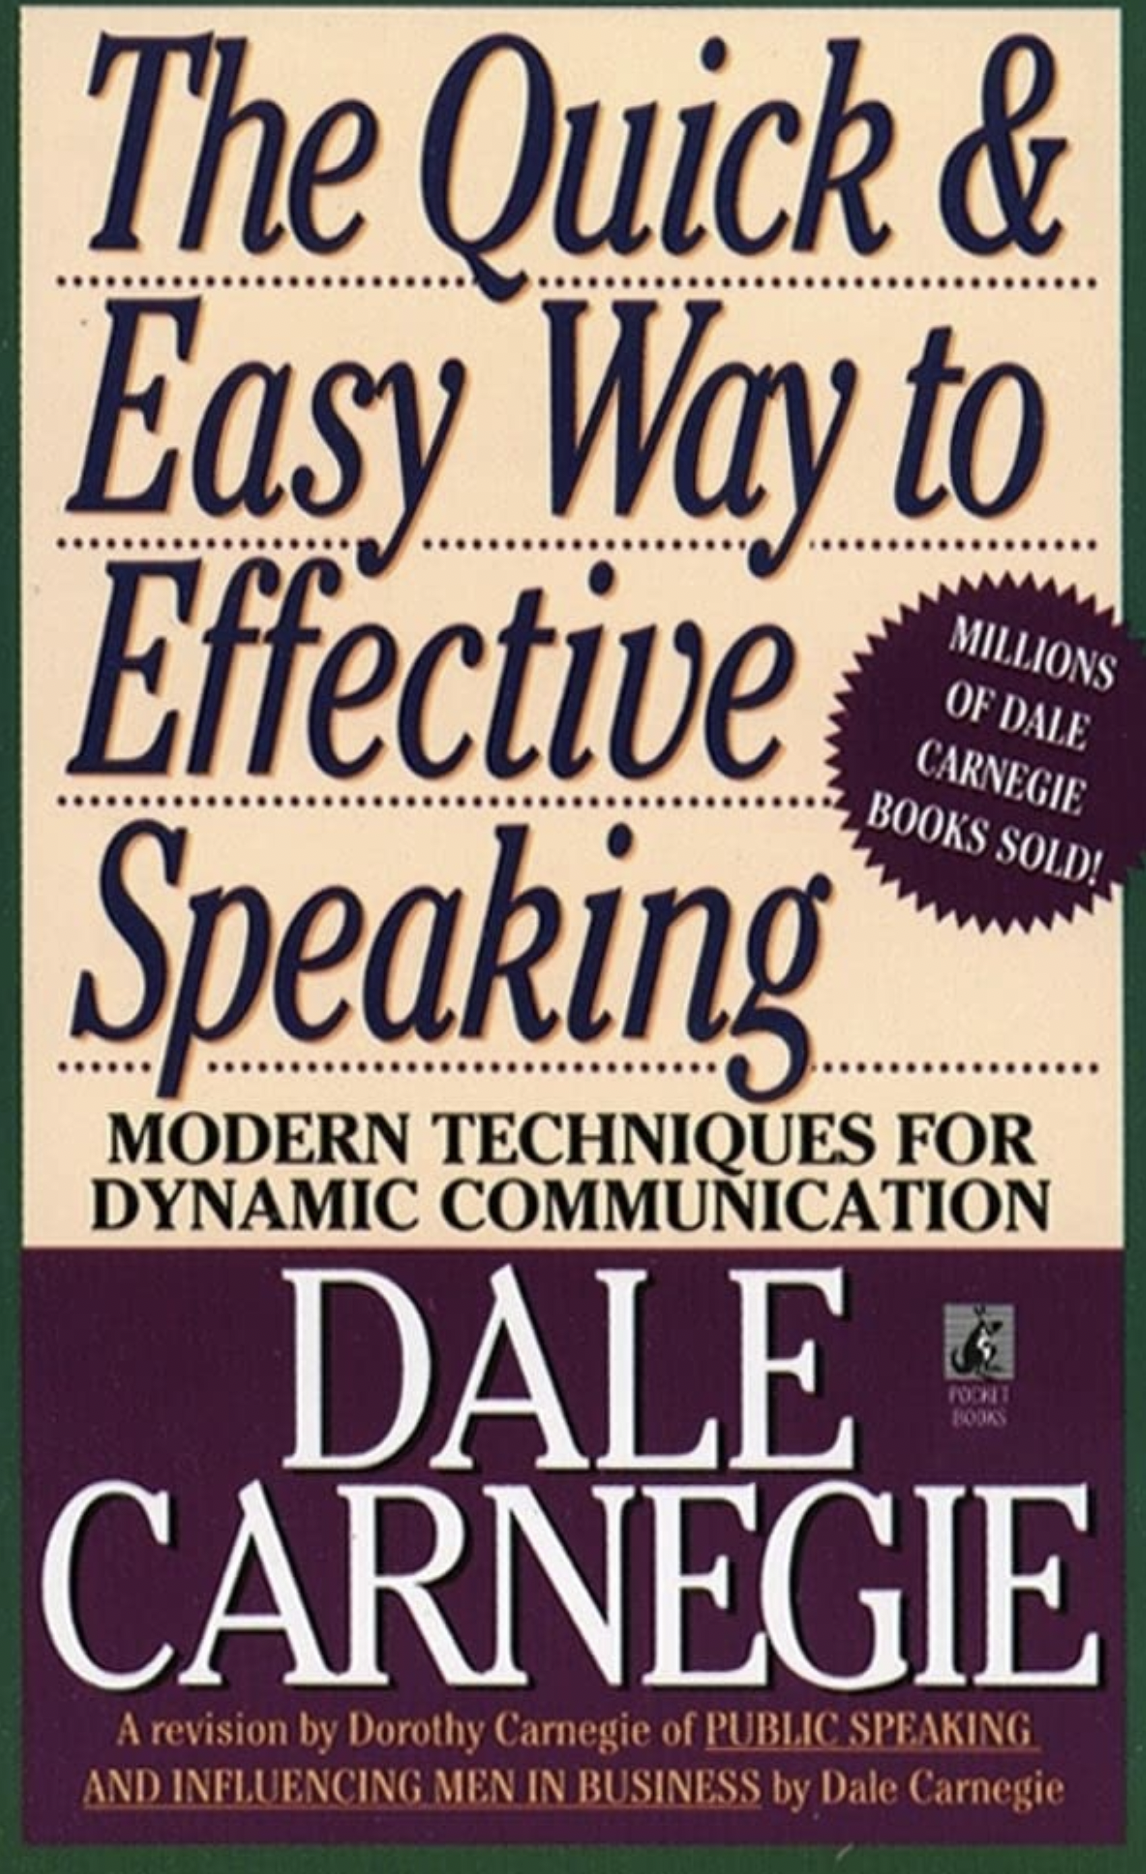 The Quick and Easy Way to Effective Speaking: Modern Techniques for Dynamic Communication by Dale Carnegie